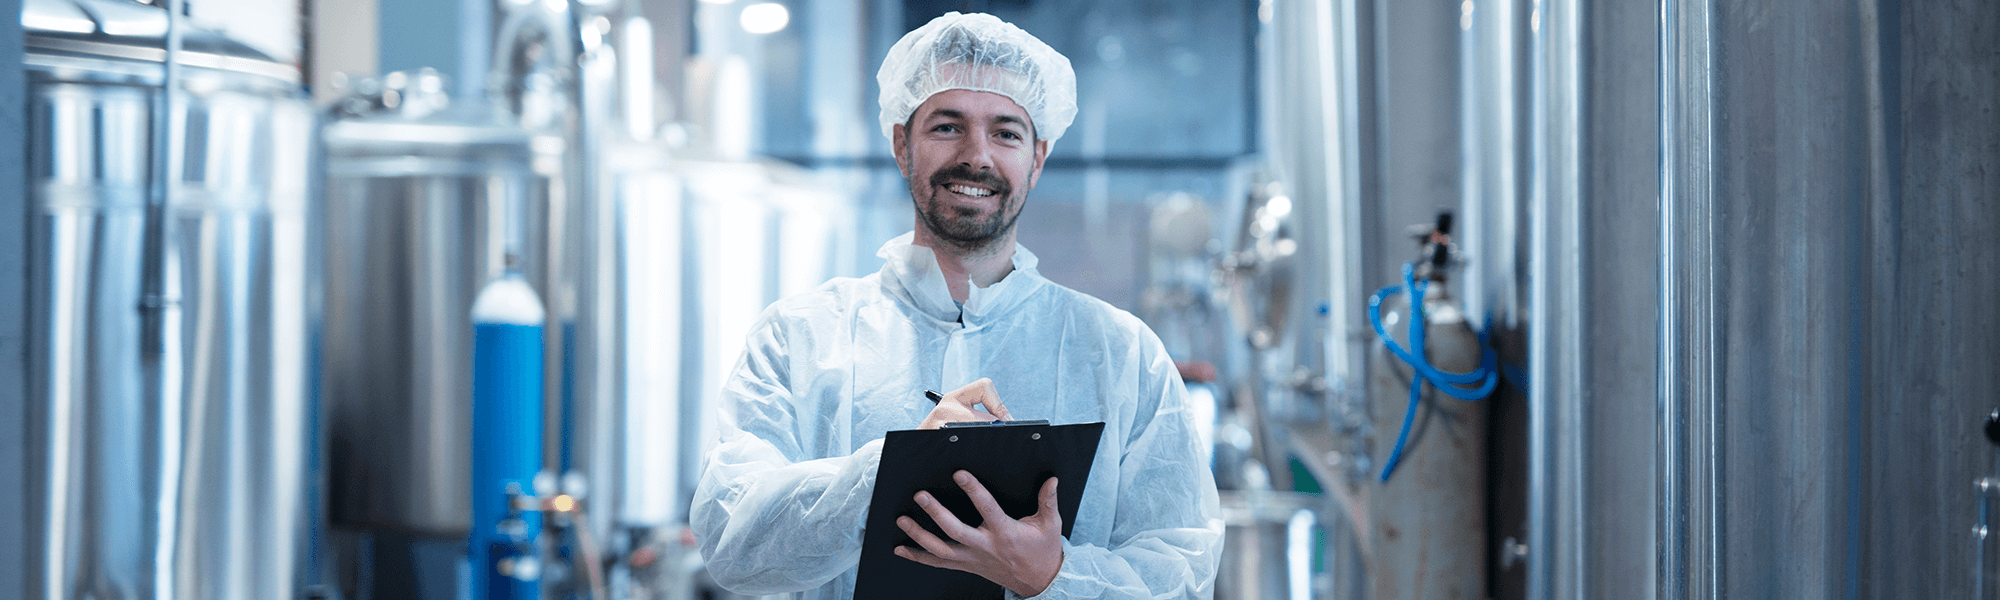 Food processing worker with clipboard